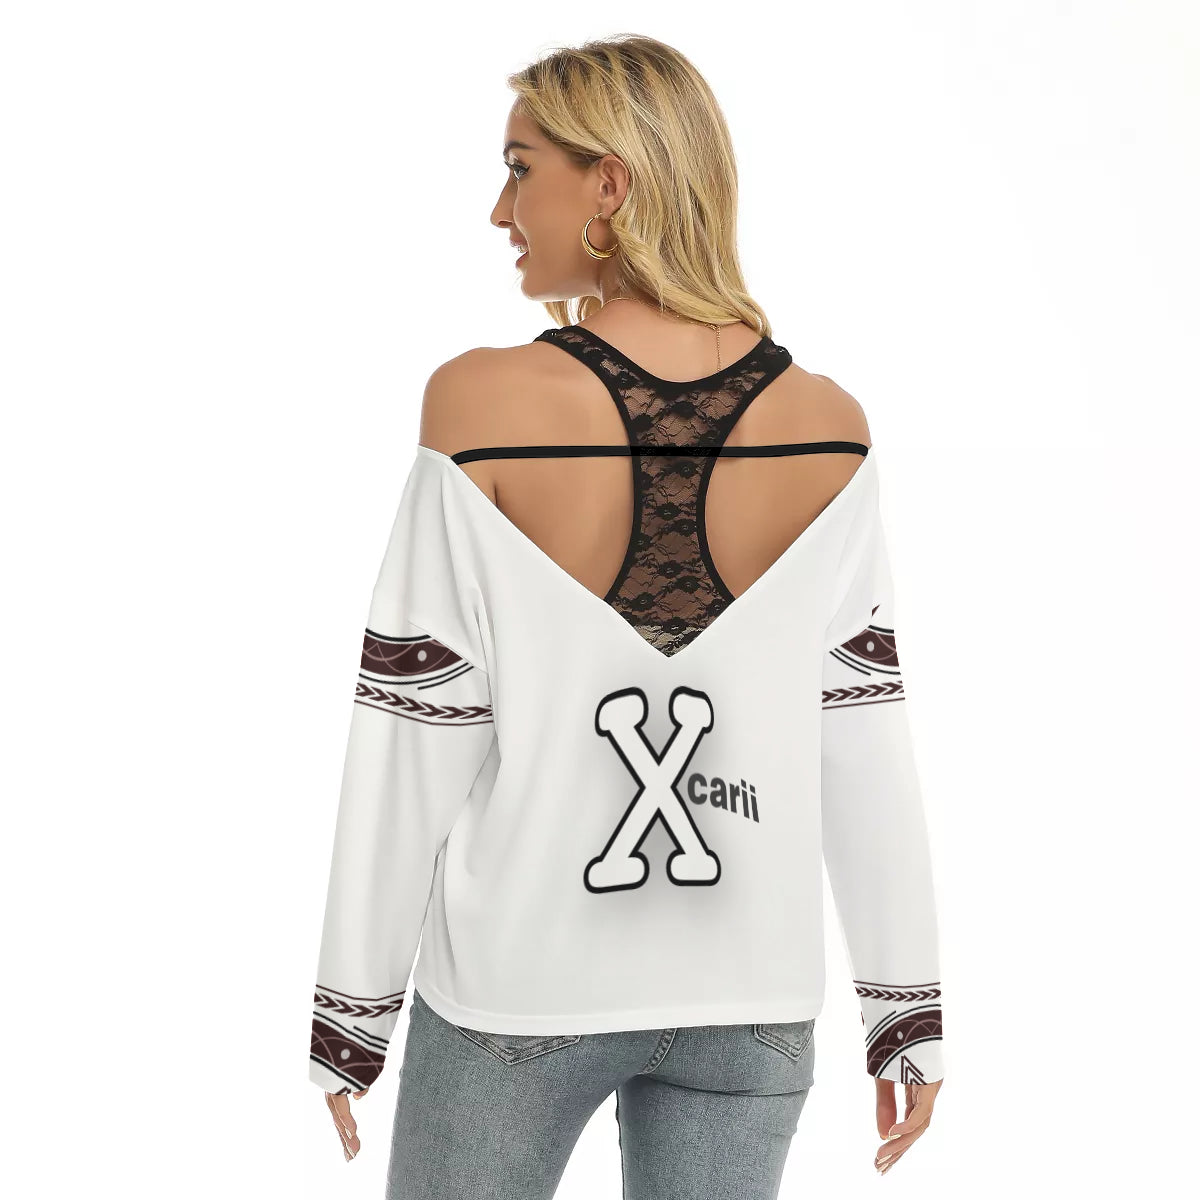 Xcarii Xii - X Lace Blouse